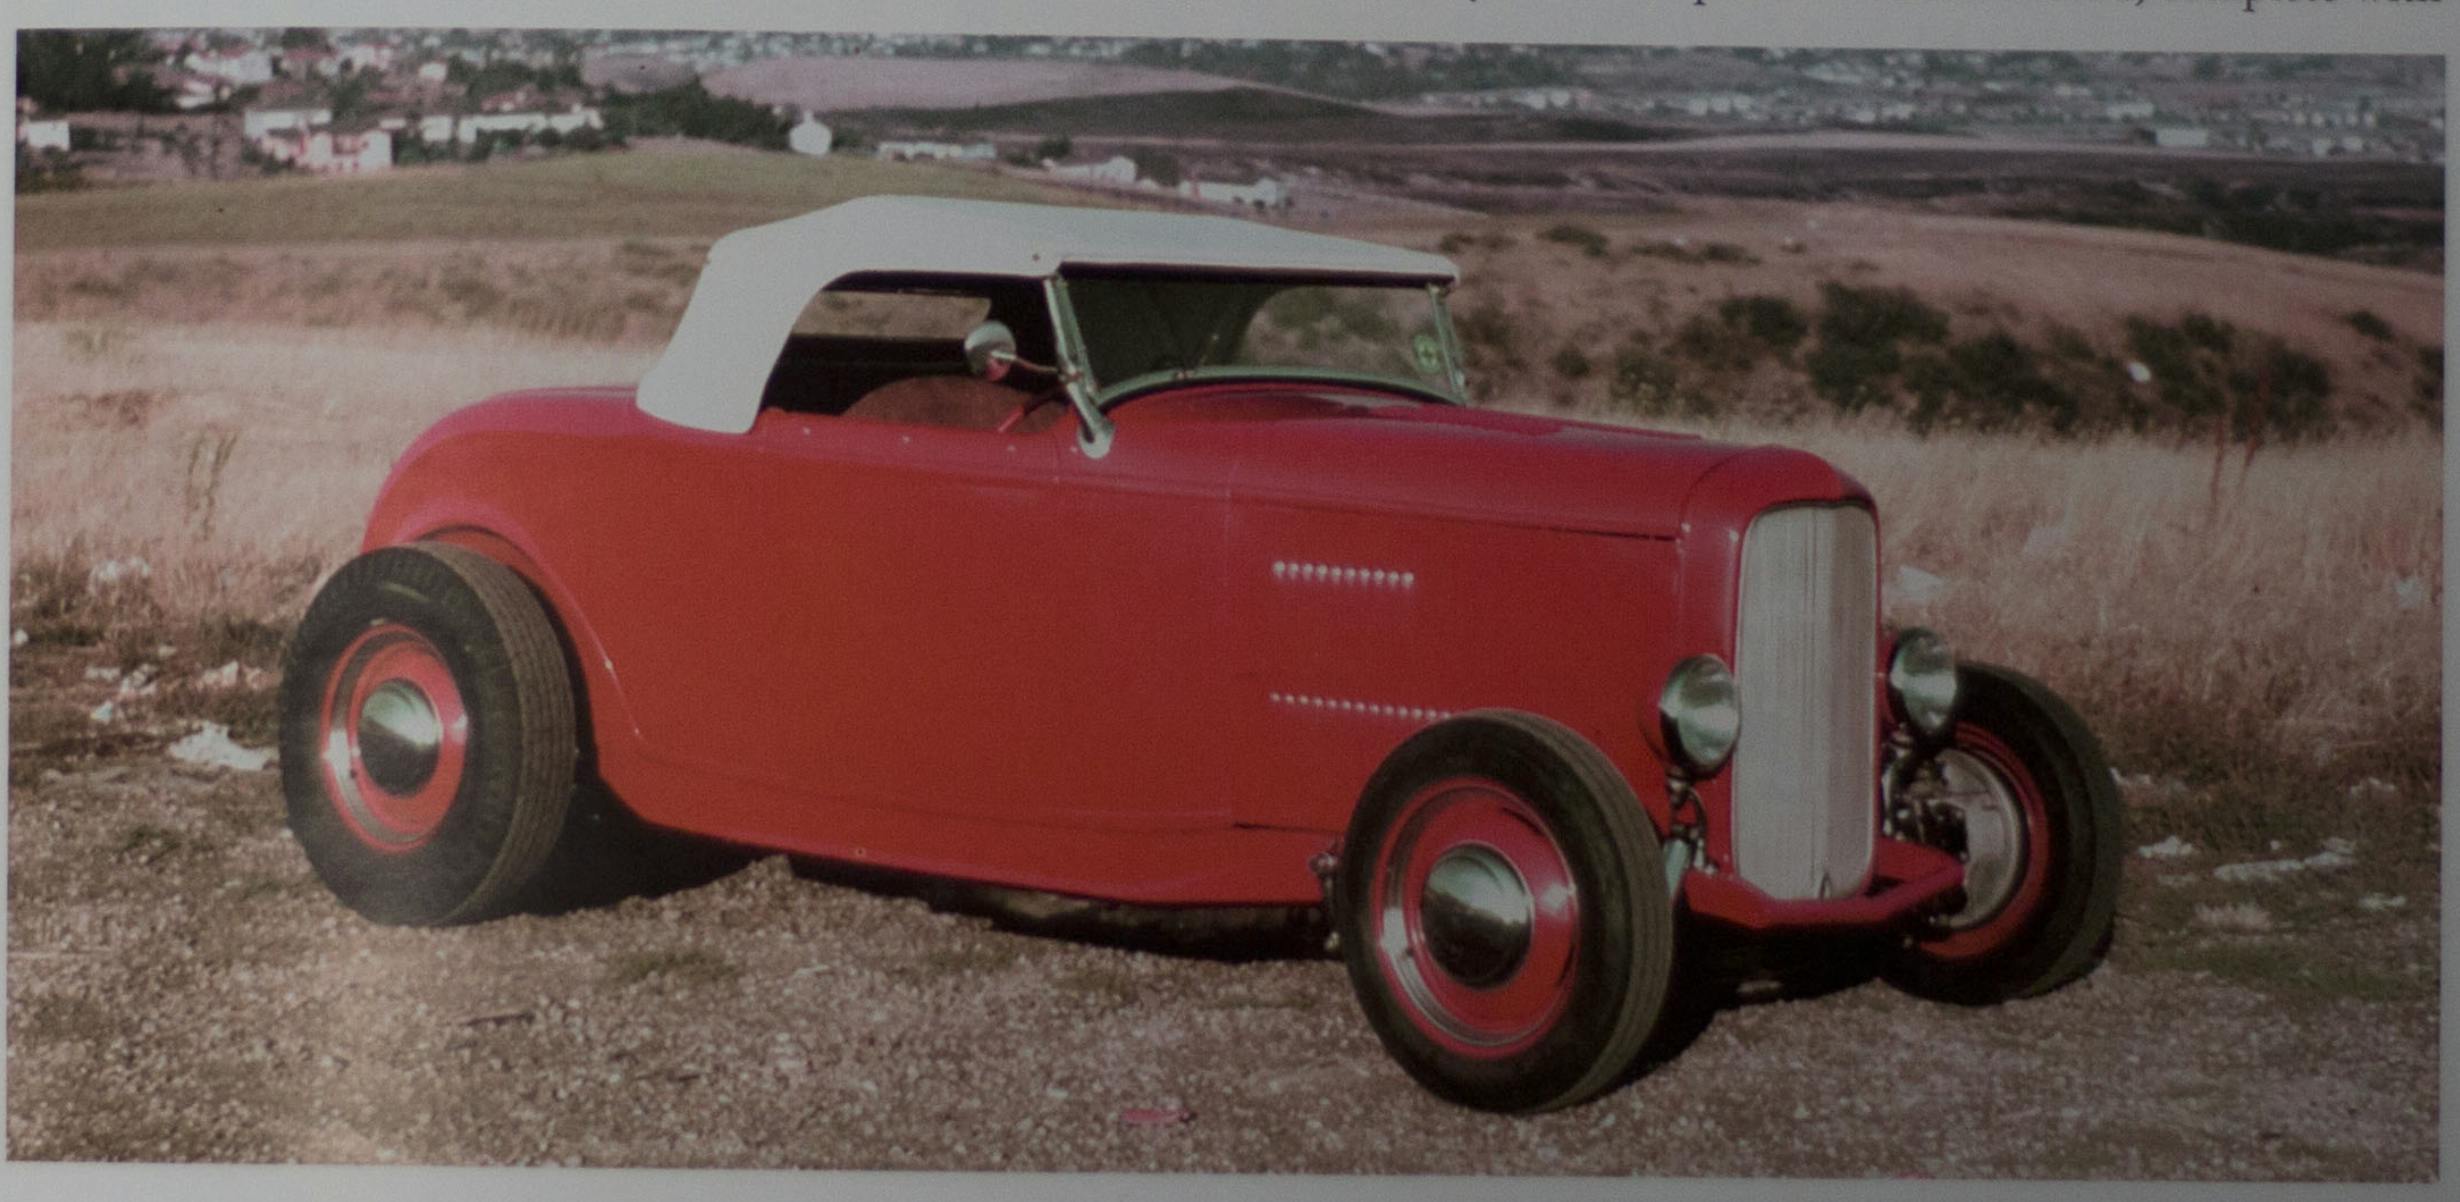 McGee Roadster - 1932 Ford - in period